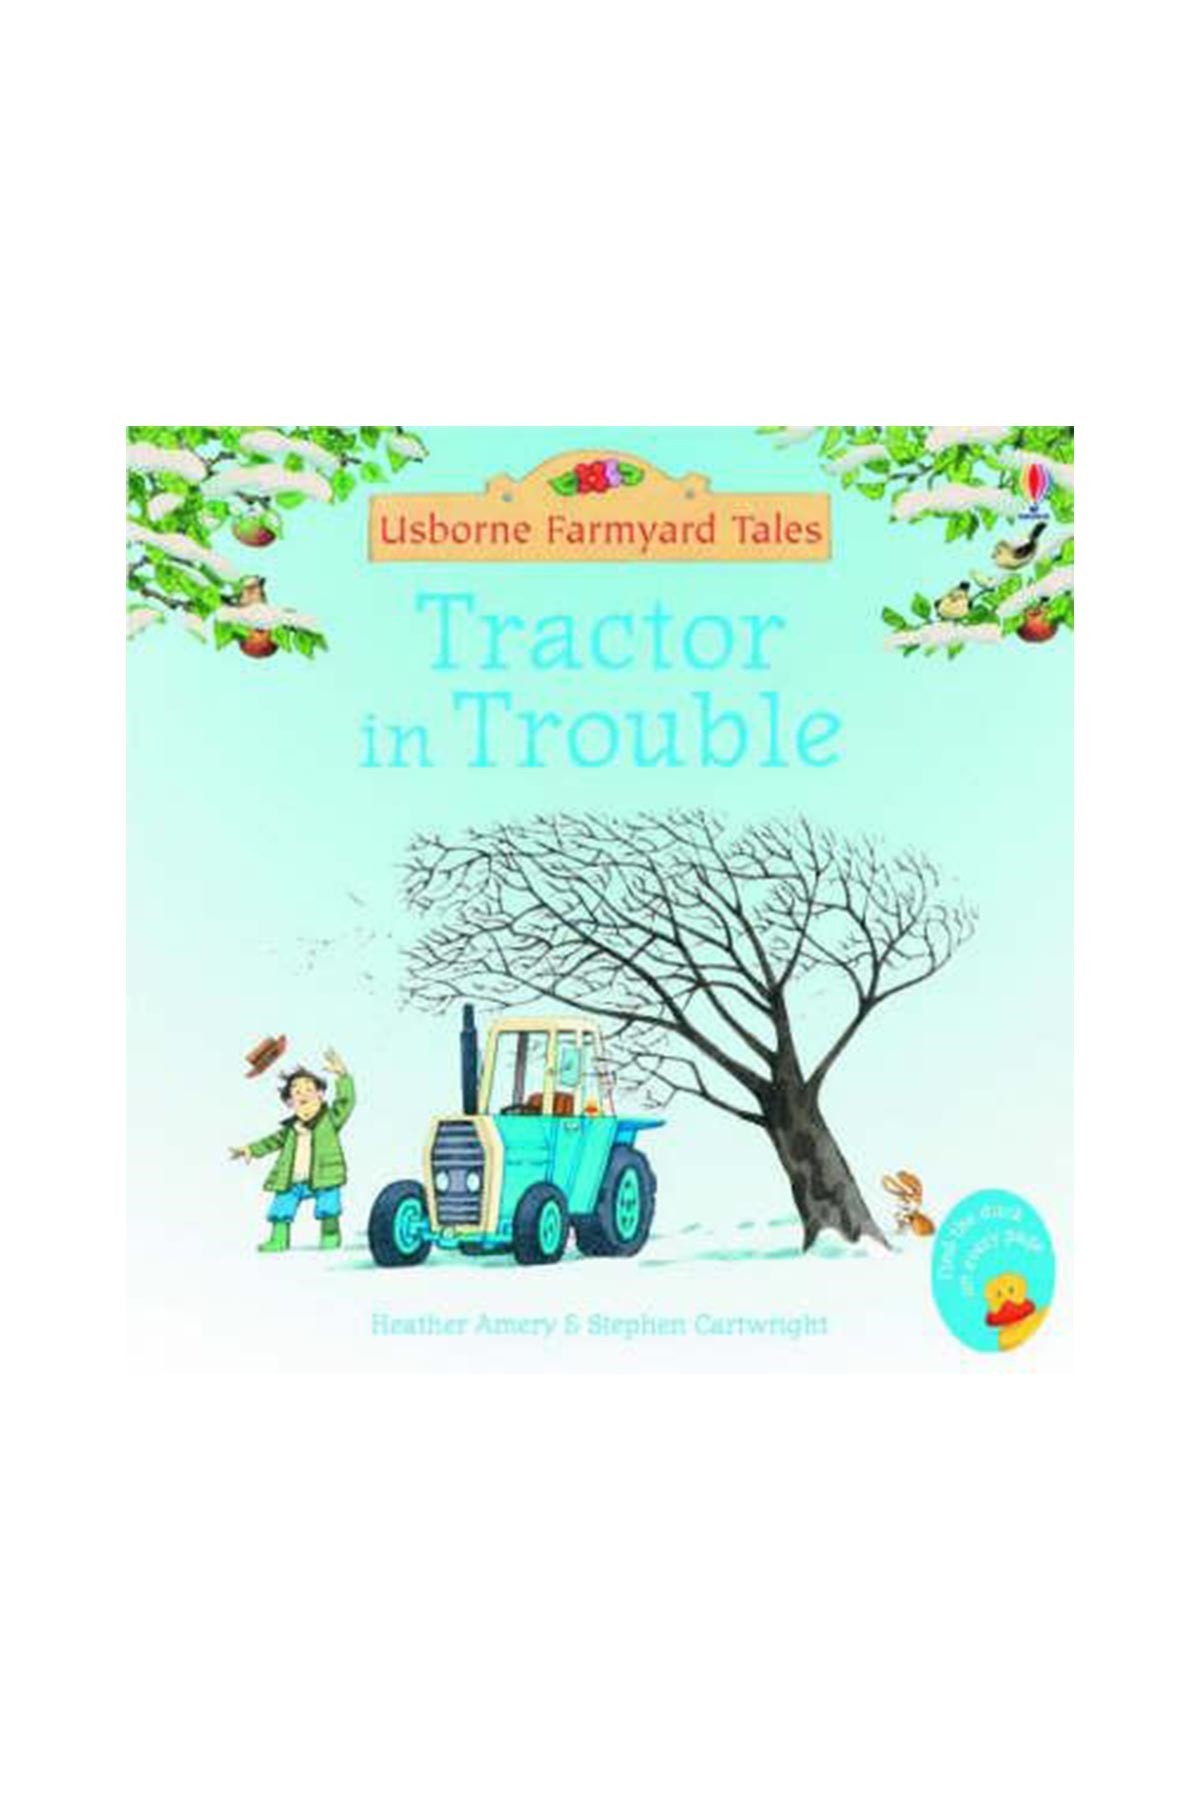 The Usborne FYT Tractor in Trouble